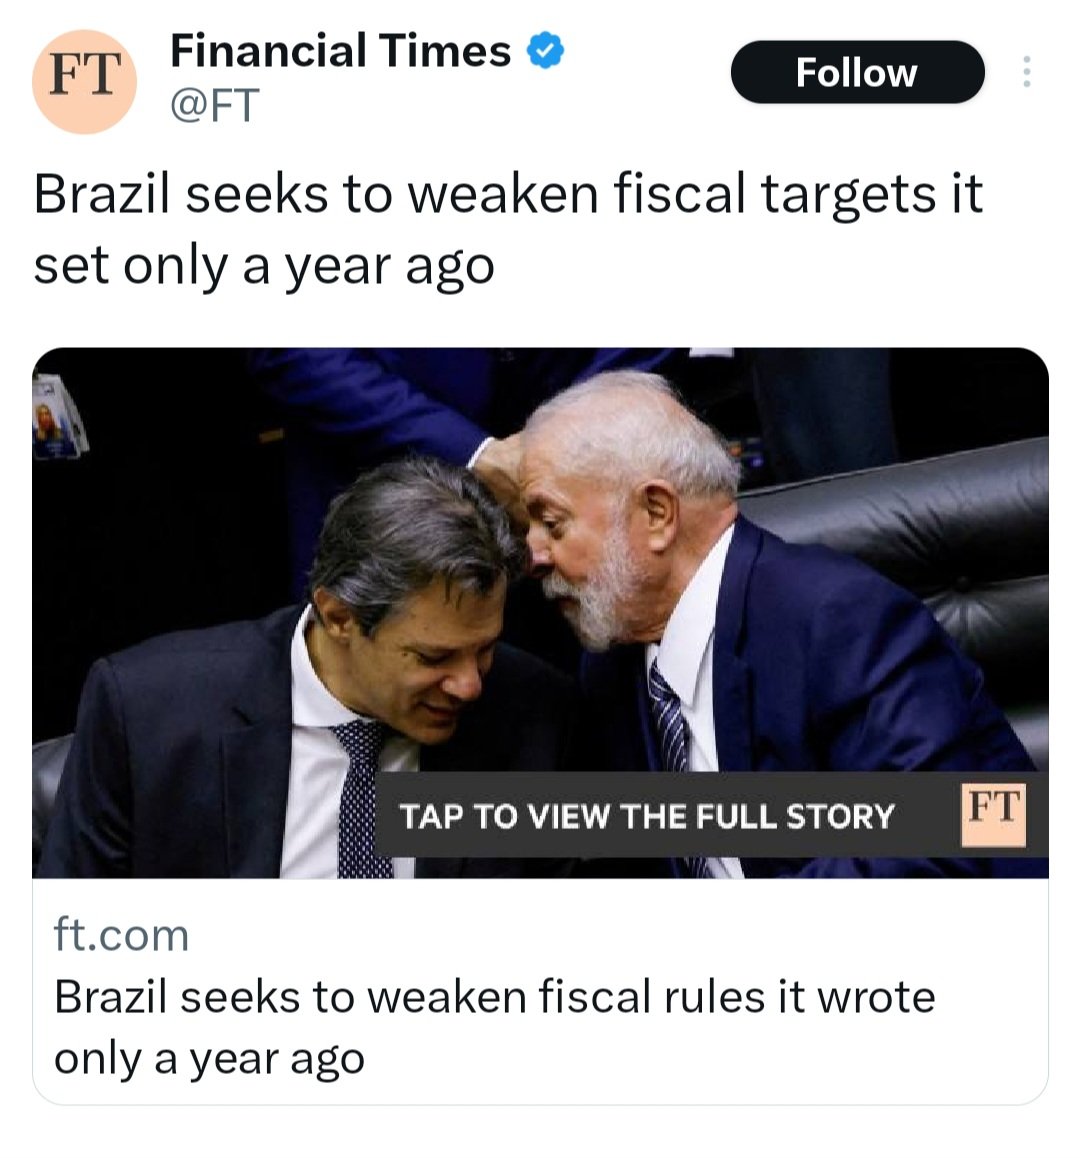 Lula and Co are not only corrupt but also incapable of running the government. The current Brazil 🇧🇷 government is a complete recipe for disaster. Read the following proofs to understand in detail.

As Financial Times reported, 

The current government of Brazil 🇧🇷, led by…